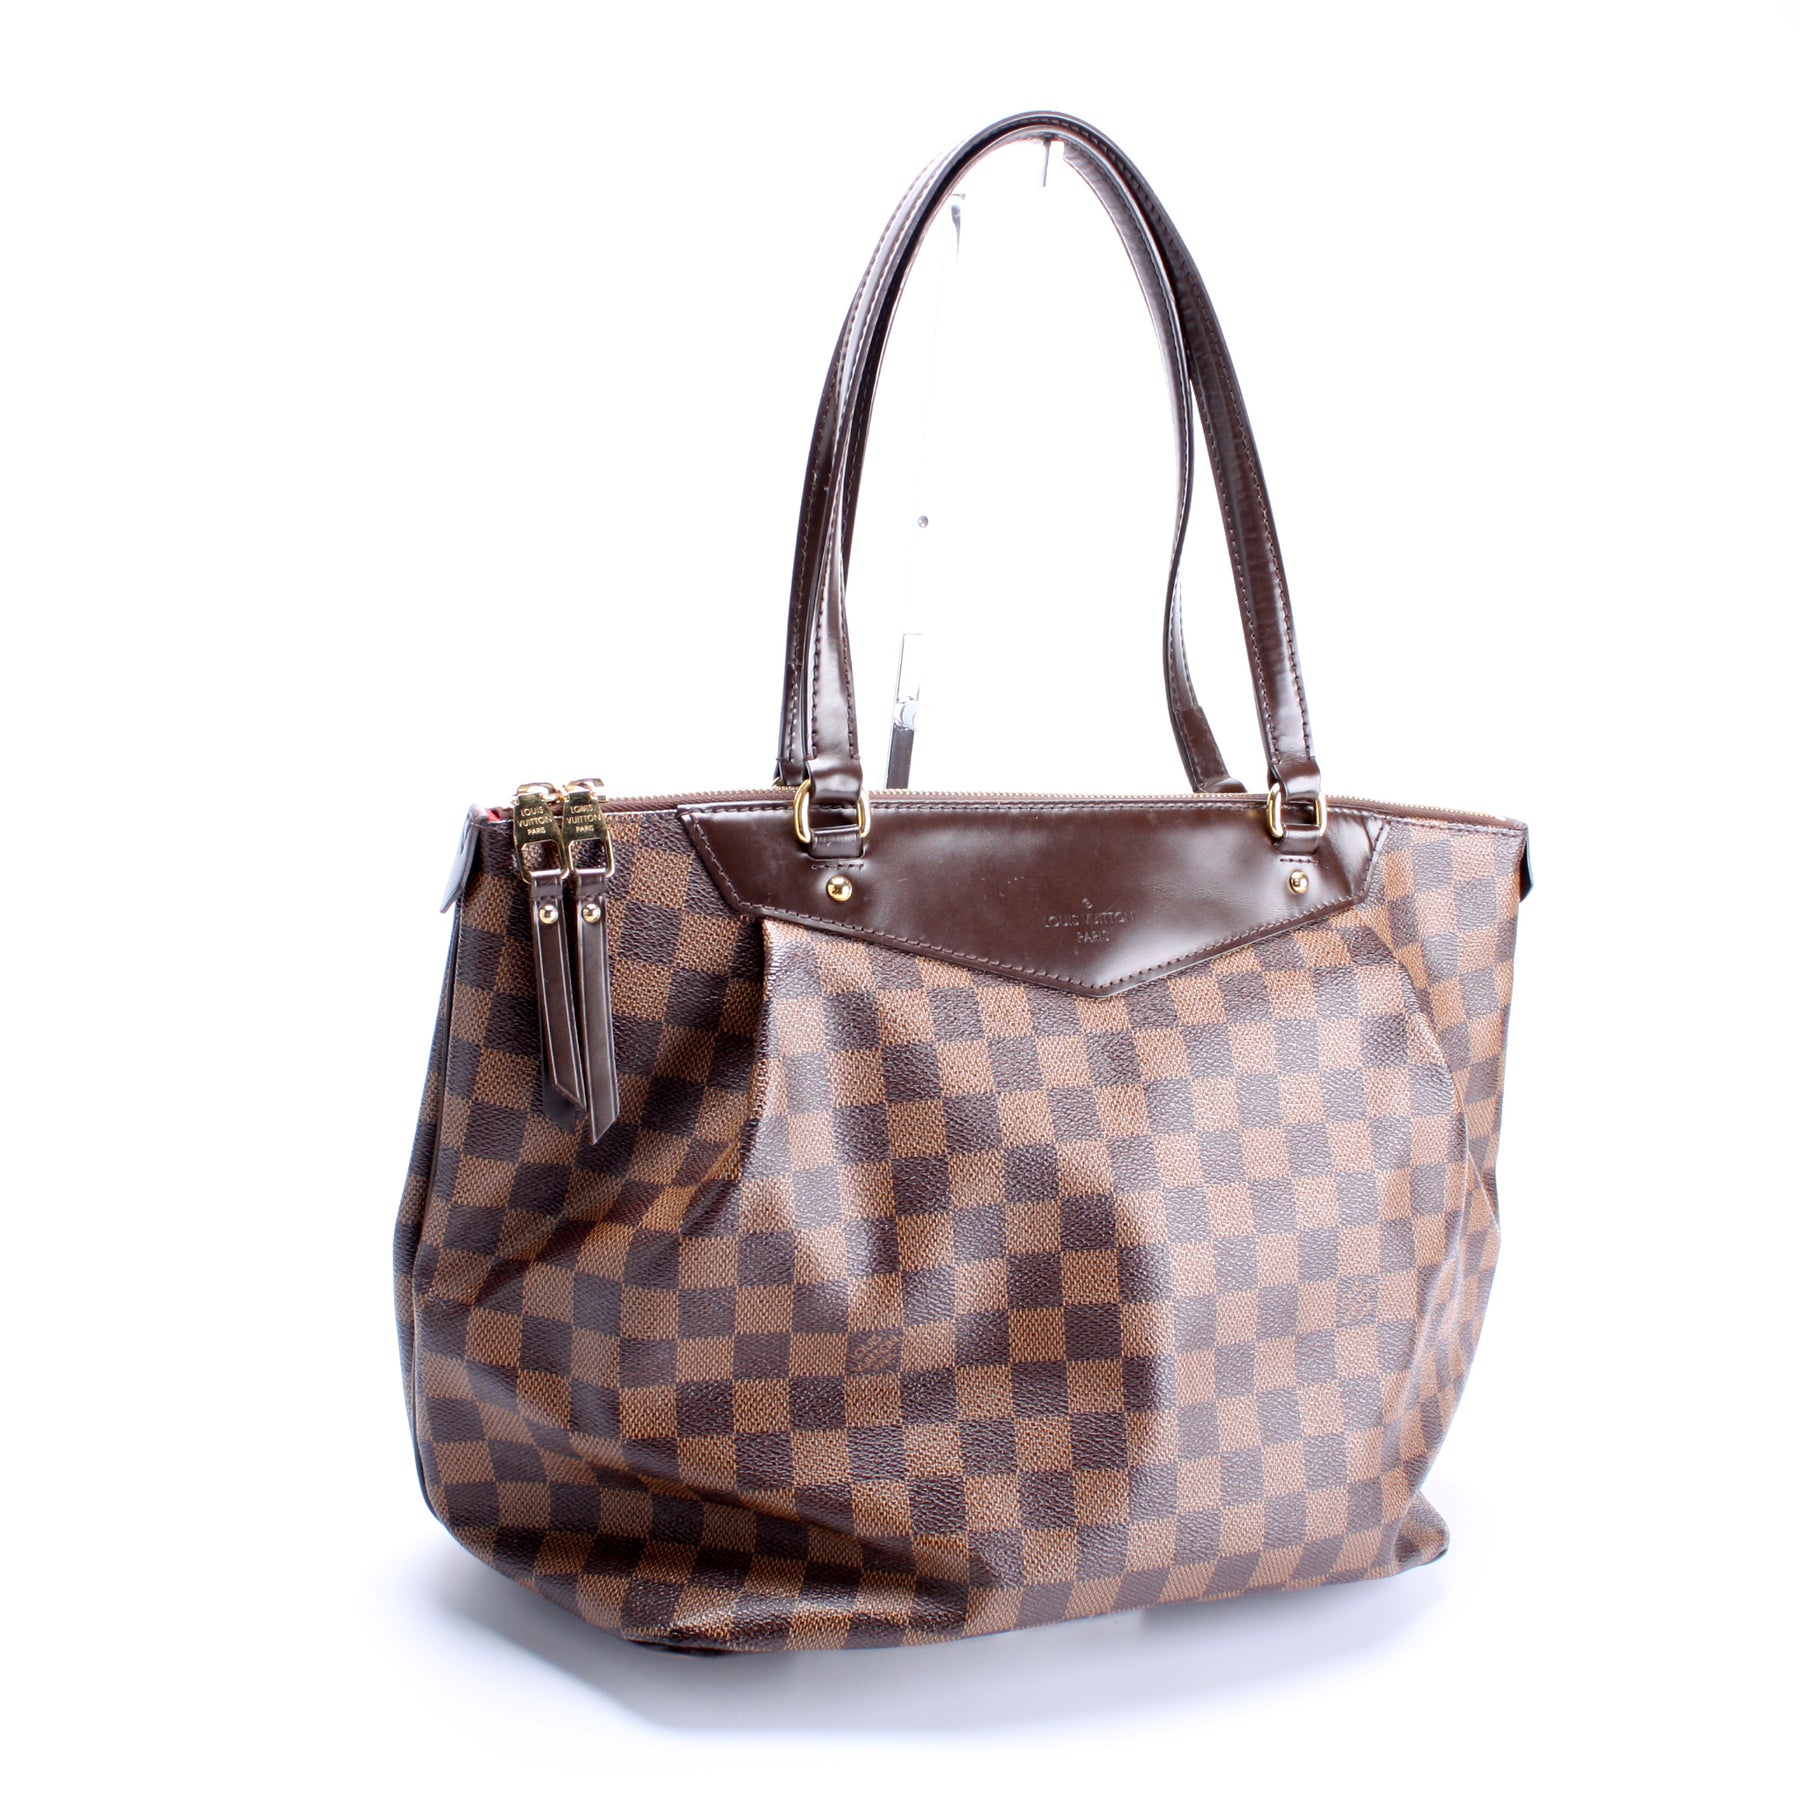 Authenticated Used LOUIS VUITTON Louis Vuitton Damier Westminster